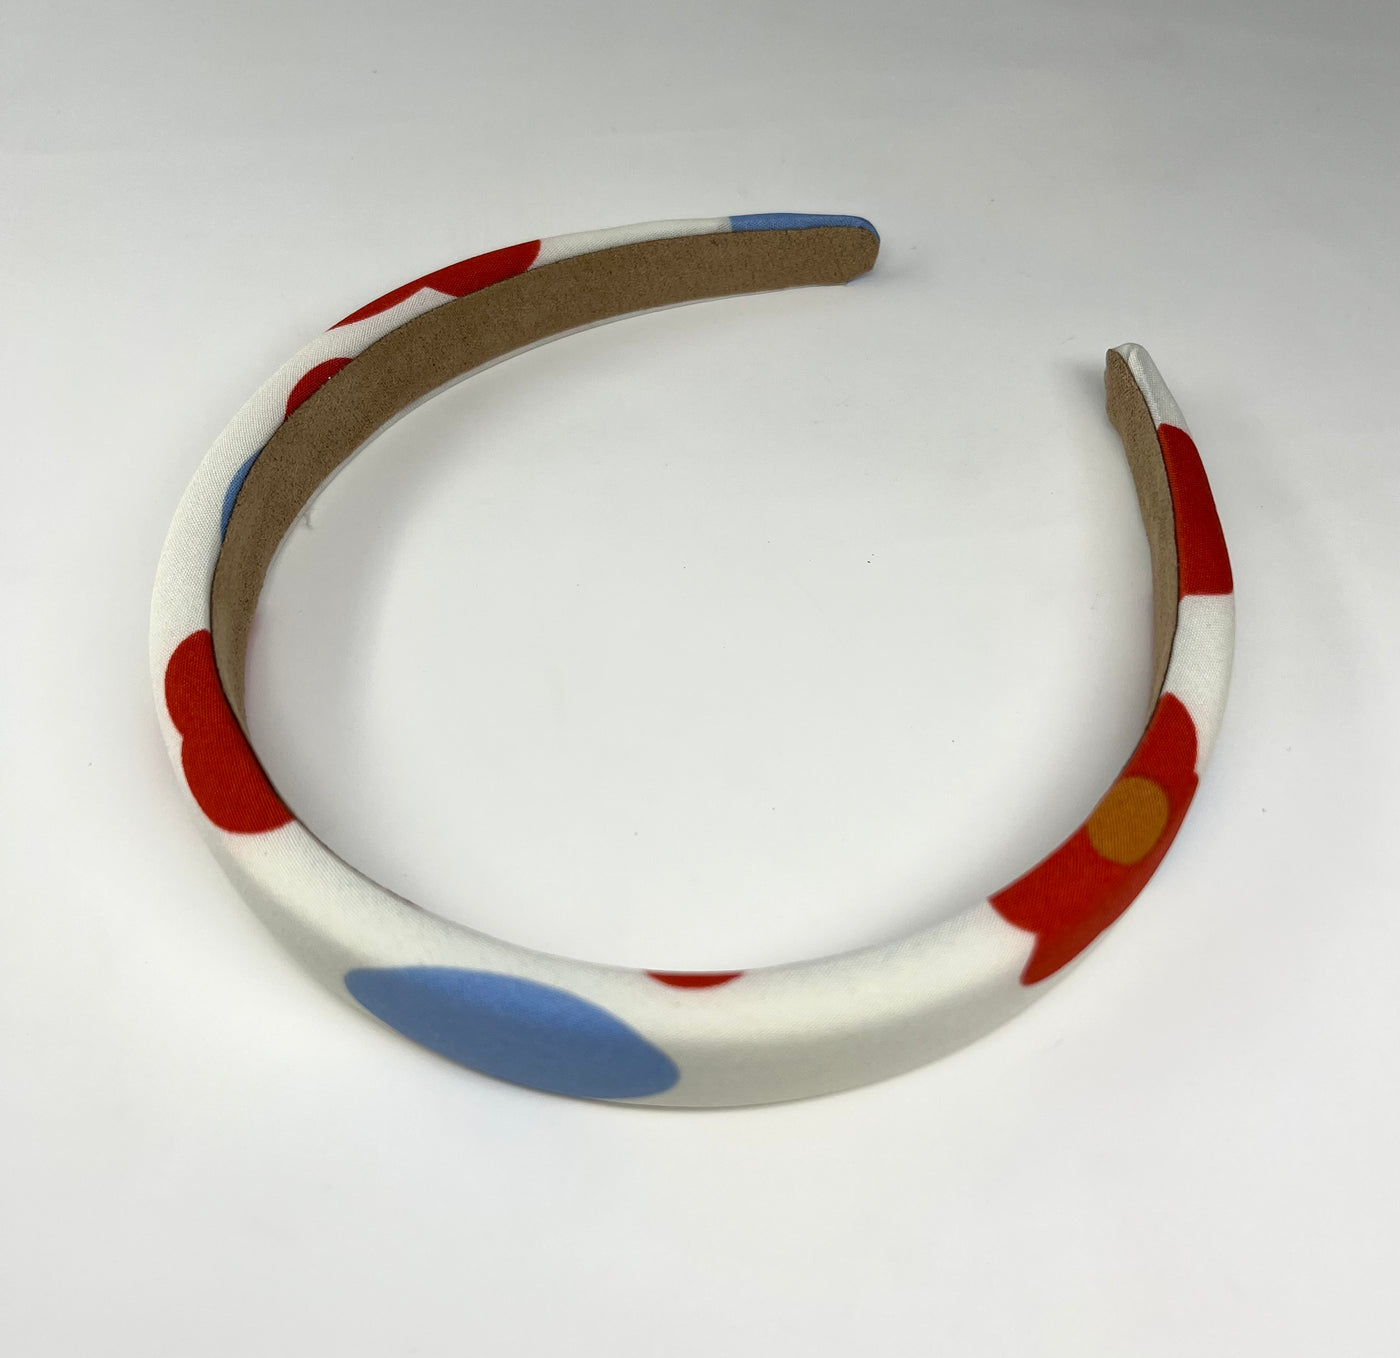 Headband- White with blue ovals and red flowers